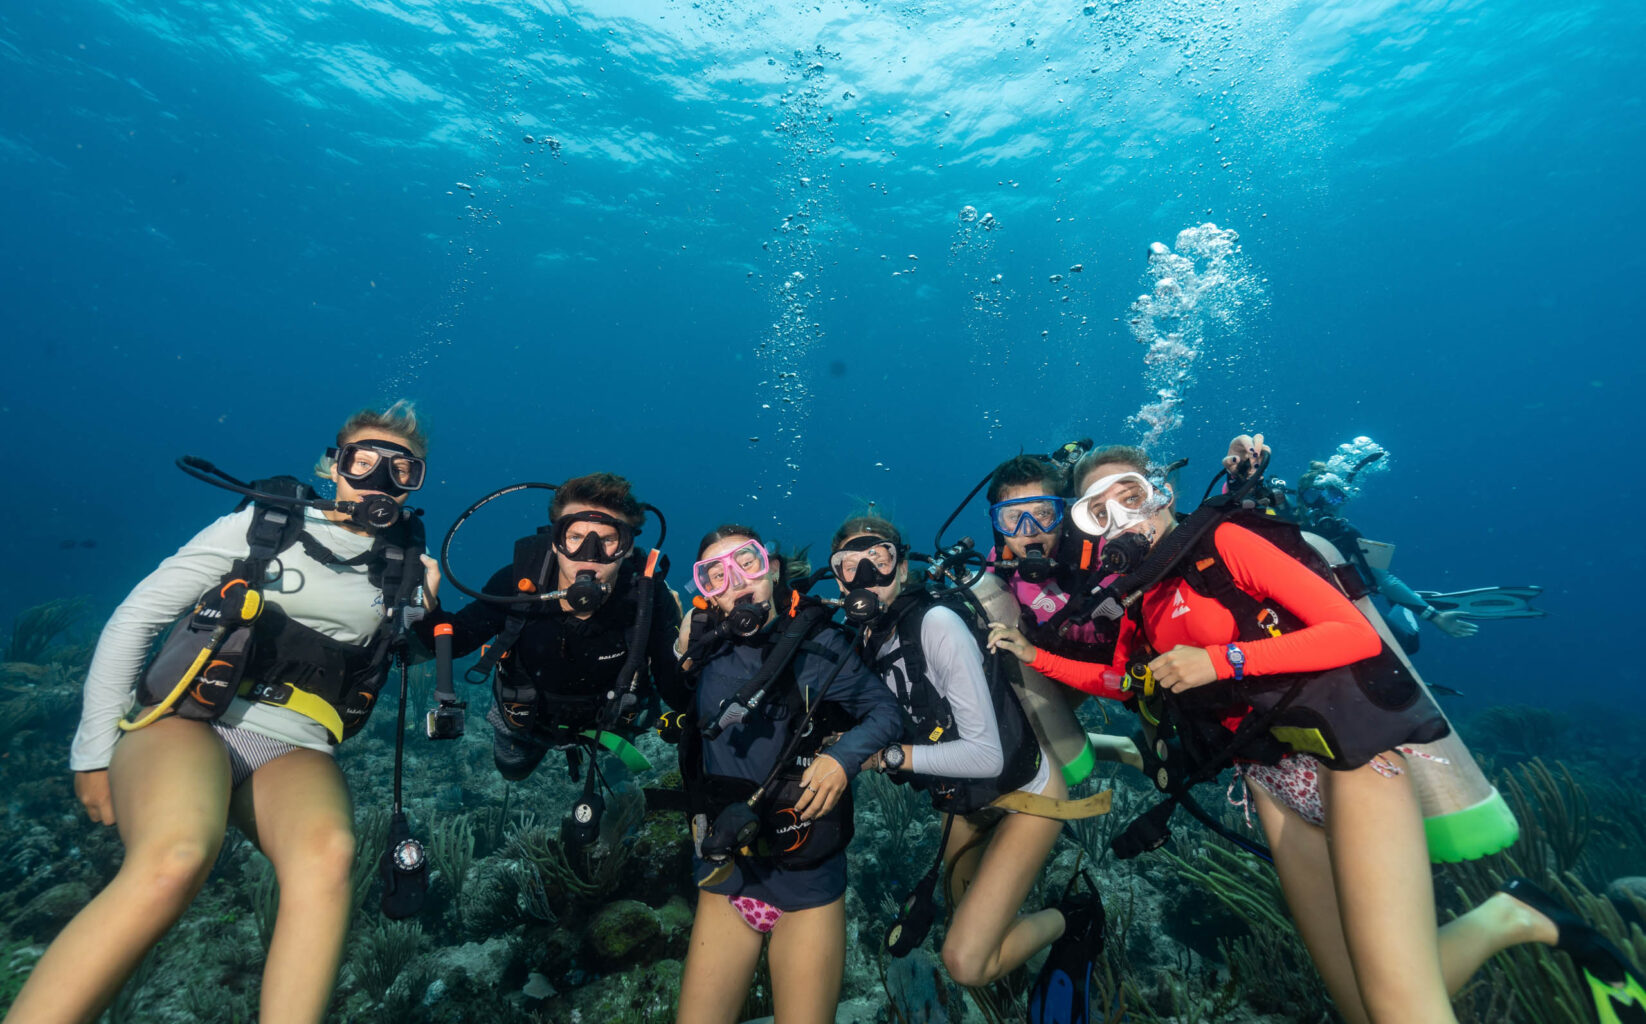 A group of scuba divers posing for a photo.